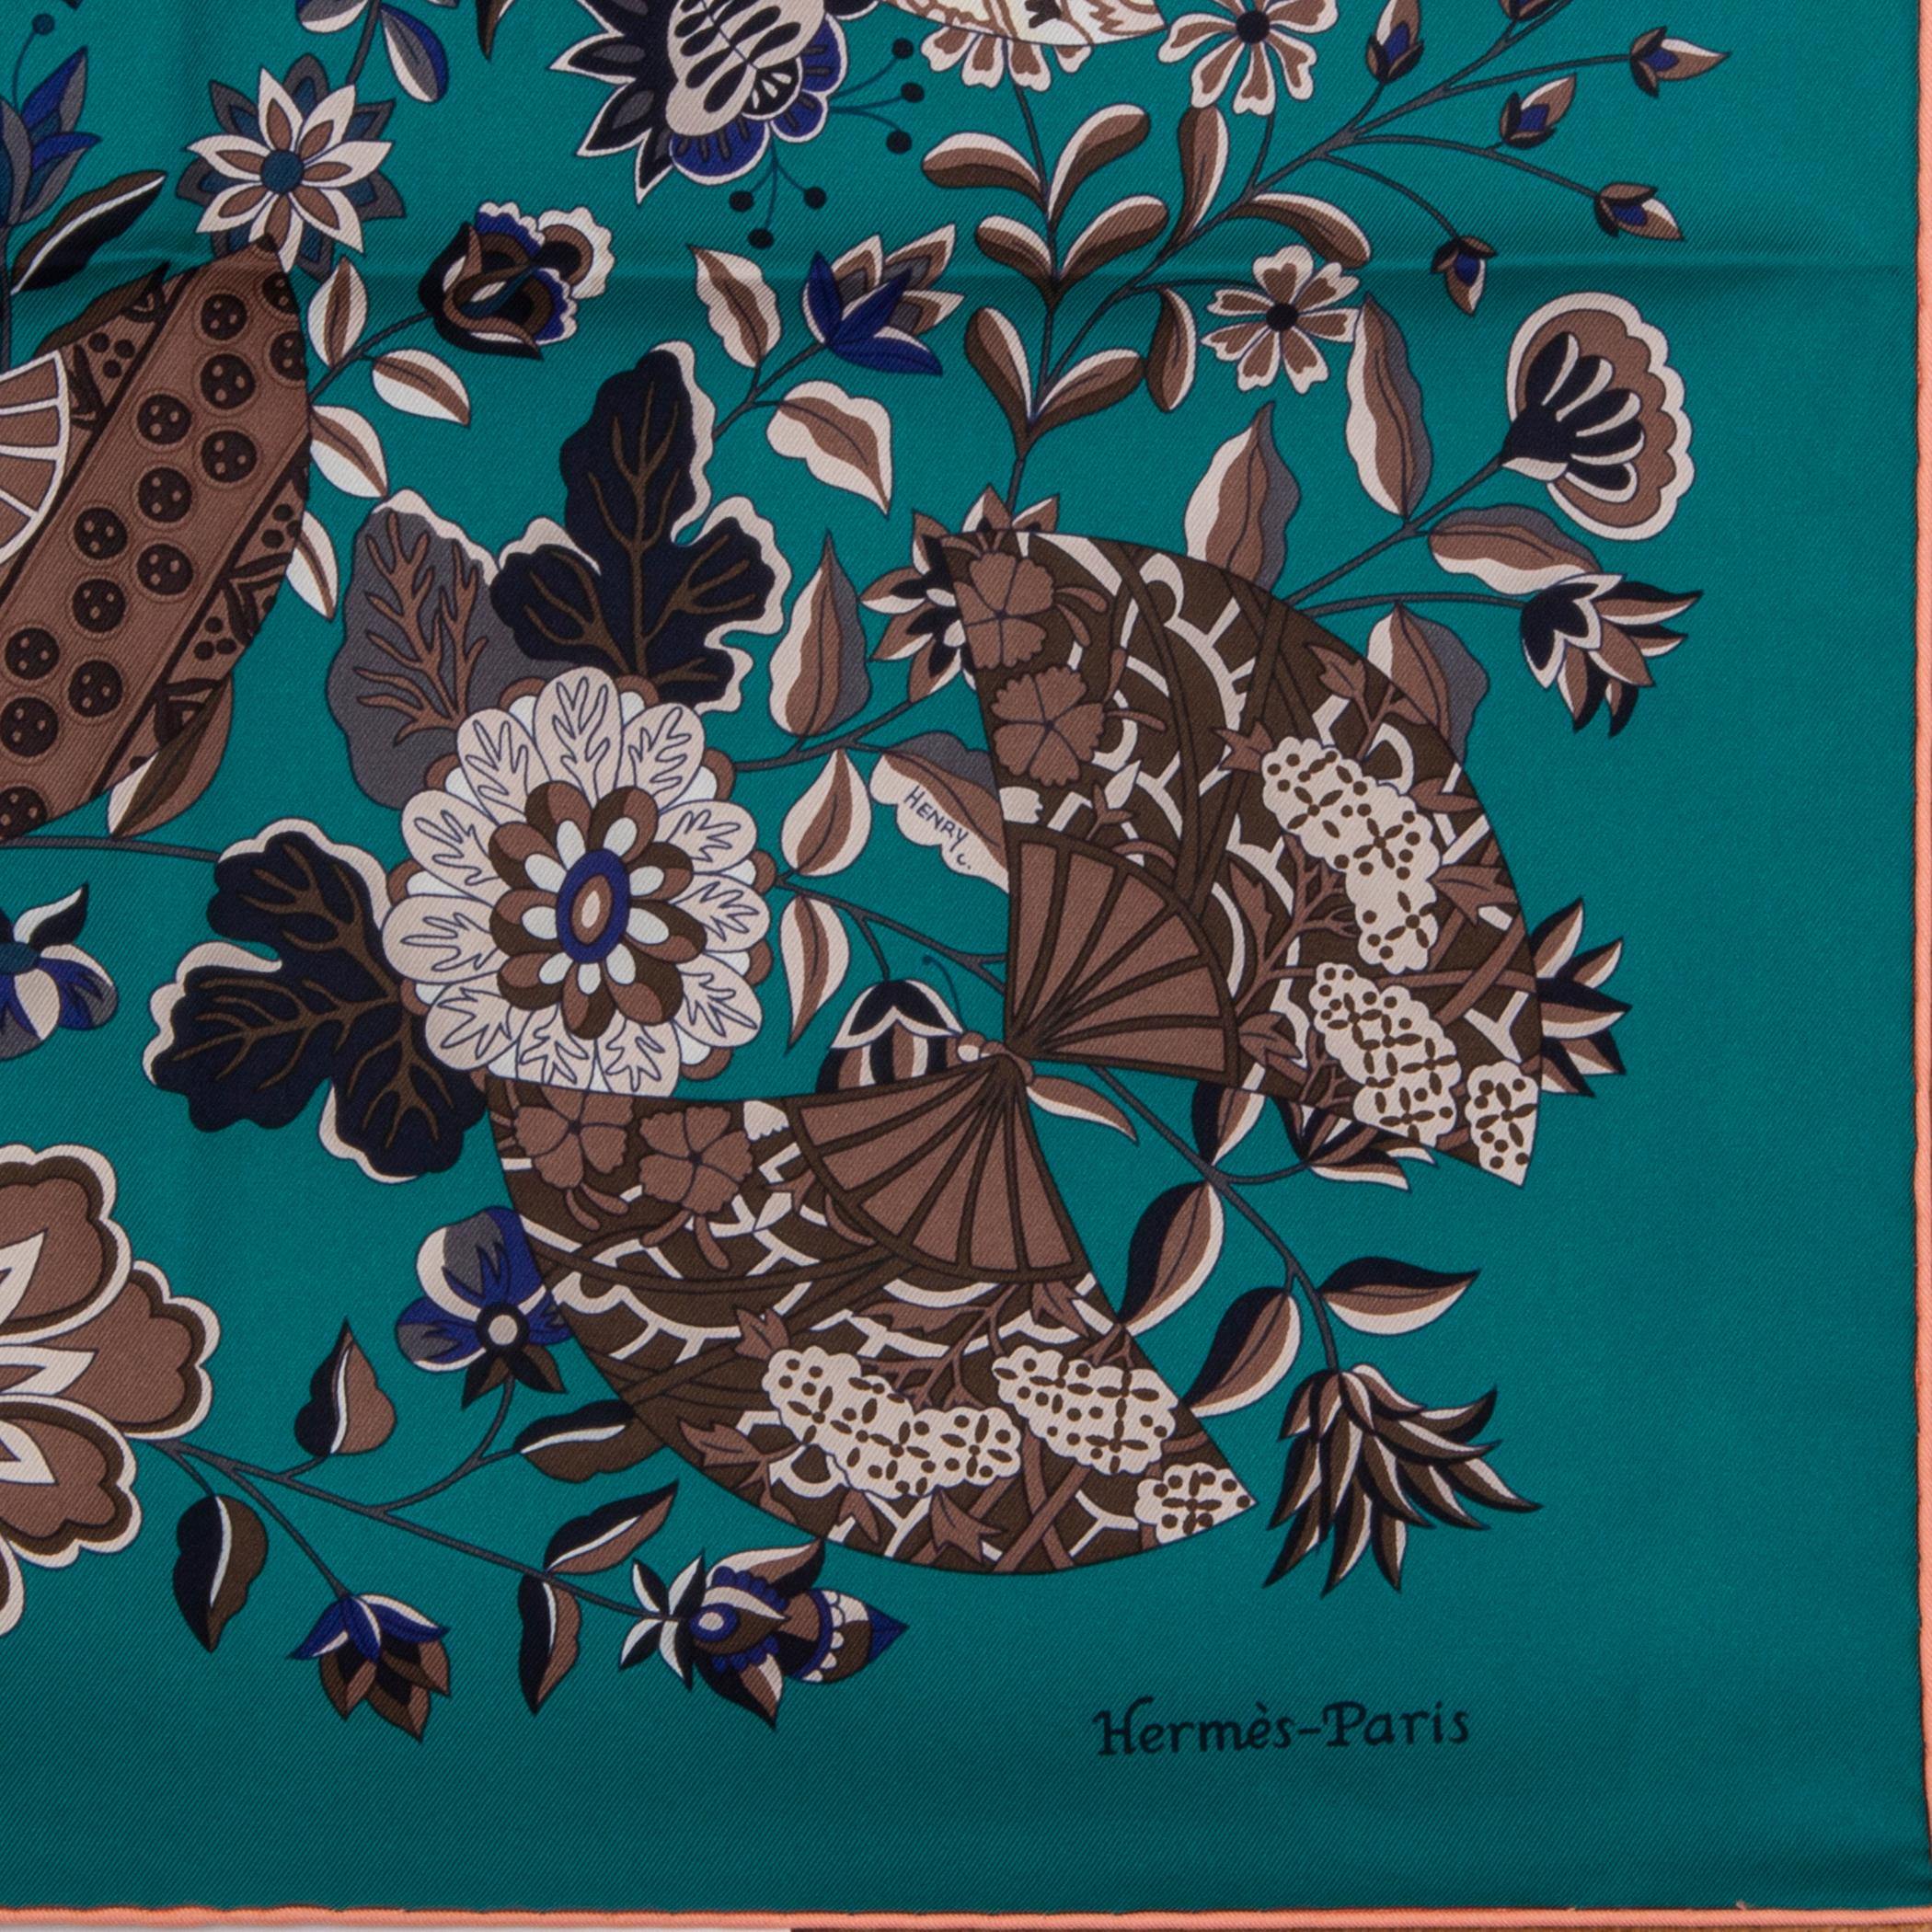 Hermes 'Fleurs et Papillons de Tissus 90' scarf in malchaite green silk twill (100%) with salmon pink hem and details in brown, blue and white. Brand new.

Width 90cm (35.1in)
Height 90cm (35.1in)